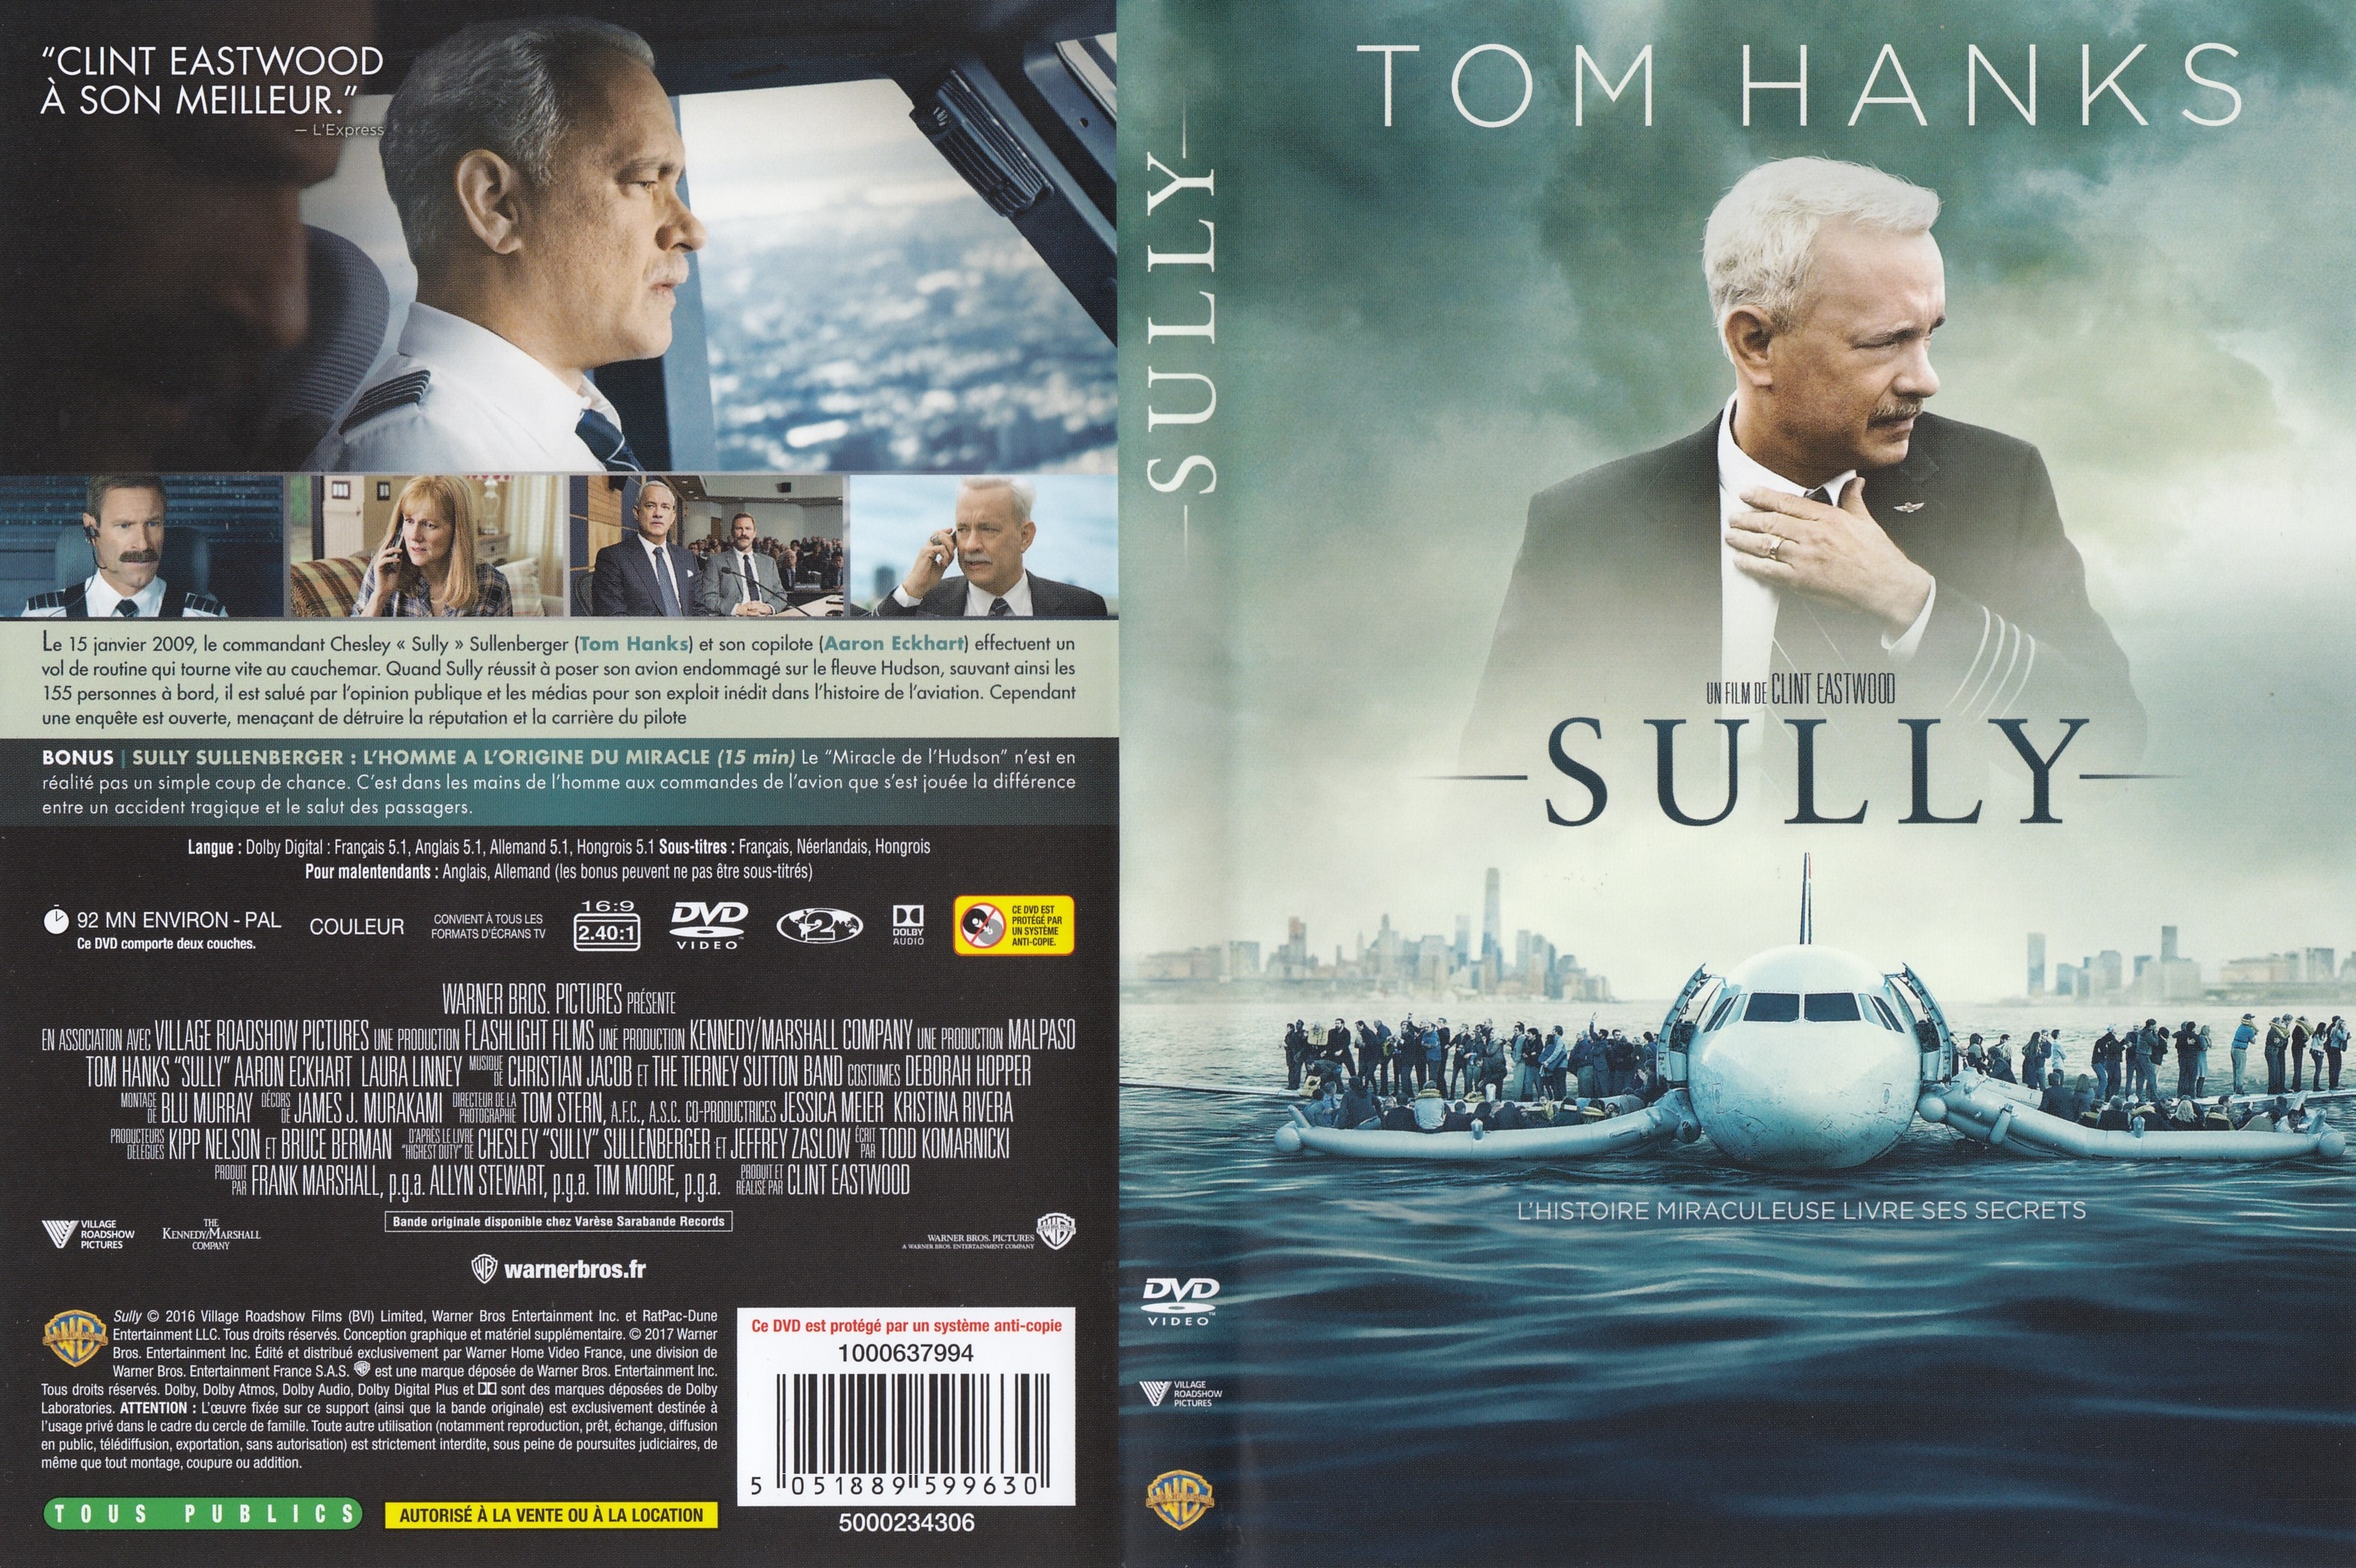 Jaquette DVD Sully